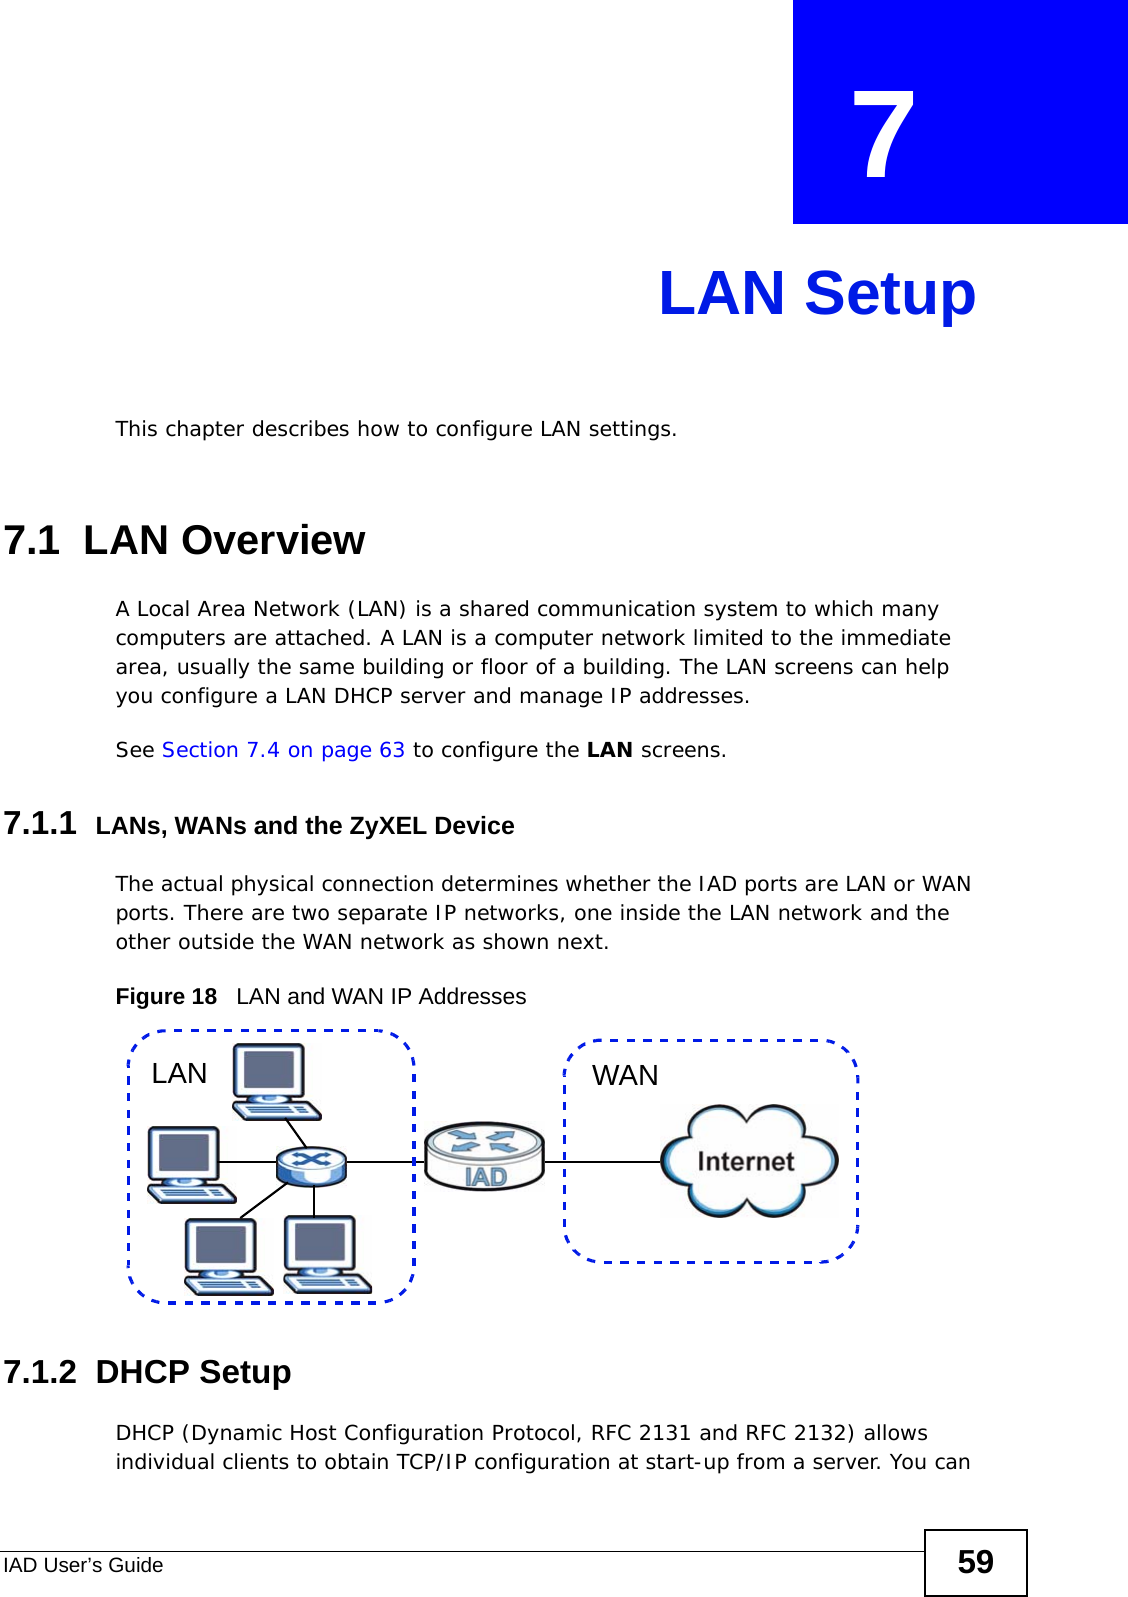 IAD User’s Guide 59CHAPTER  7 LAN SetupThis chapter describes how to configure LAN settings.7.1  LAN Overview A Local Area Network (LAN) is a shared communication system to which many computers are attached. A LAN is a computer network limited to the immediate area, usually the same building or floor of a building. The LAN screens can help you configure a LAN DHCP server and manage IP addresses.  See Section 7.4 on page 63 to configure the LAN screens. 7.1.1  LANs, WANs and the ZyXEL DeviceThe actual physical connection determines whether the IAD ports are LAN or WAN ports. There are two separate IP networks, one inside the LAN network and the other outside the WAN network as shown next.Figure 18   LAN and WAN IP Addresses7.1.2  DHCP SetupDHCP (Dynamic Host Configuration Protocol, RFC 2131 and RFC 2132) allows individual clients to obtain TCP/IP configuration at start-up from a server. You can WANLAN